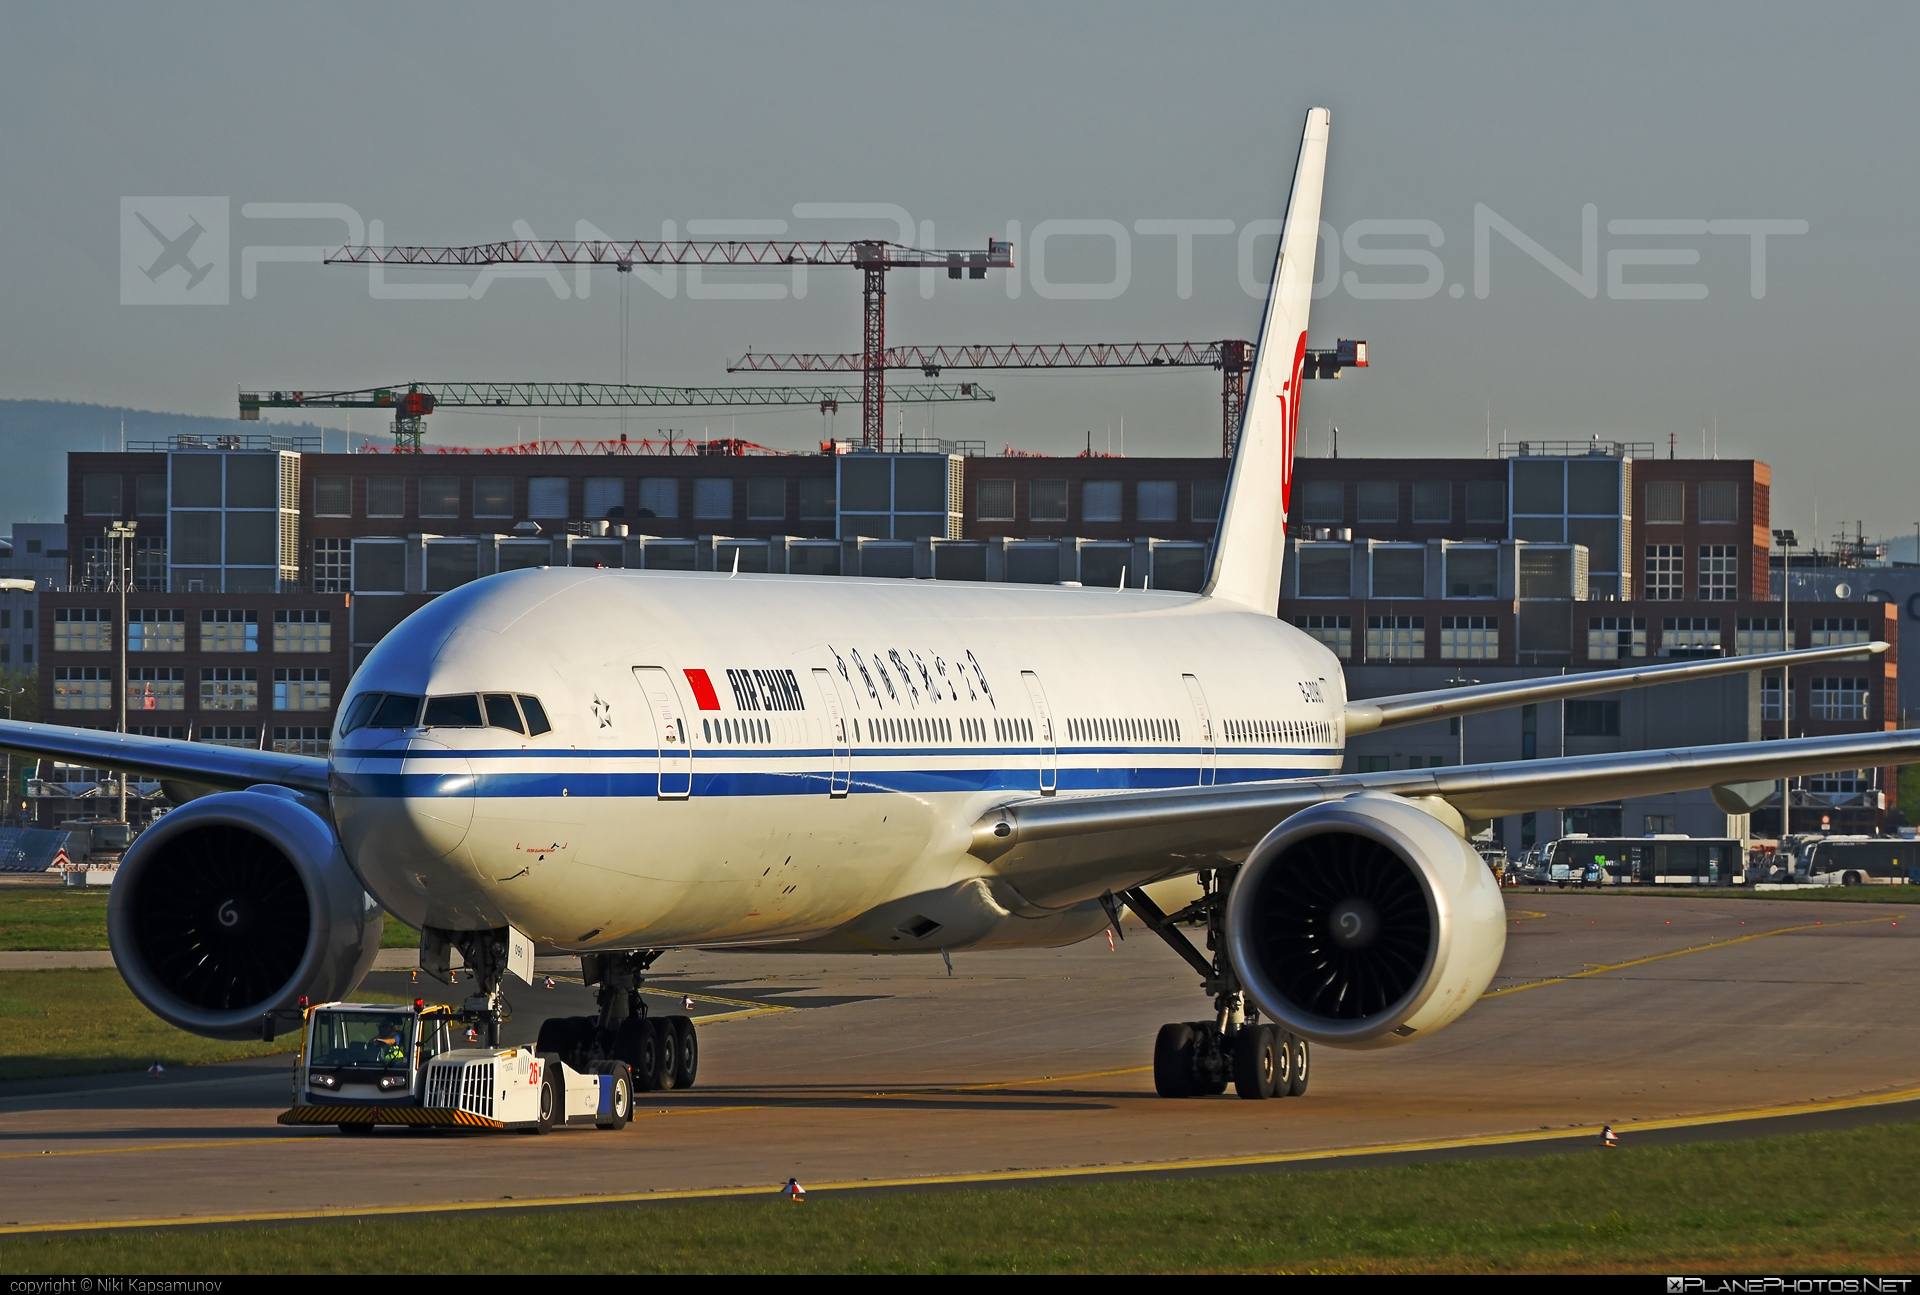 Boeing 777-300ER - B-2090 operated by Air China #airchina #b777 #b777er #boeing #boeing777 #tripleseven